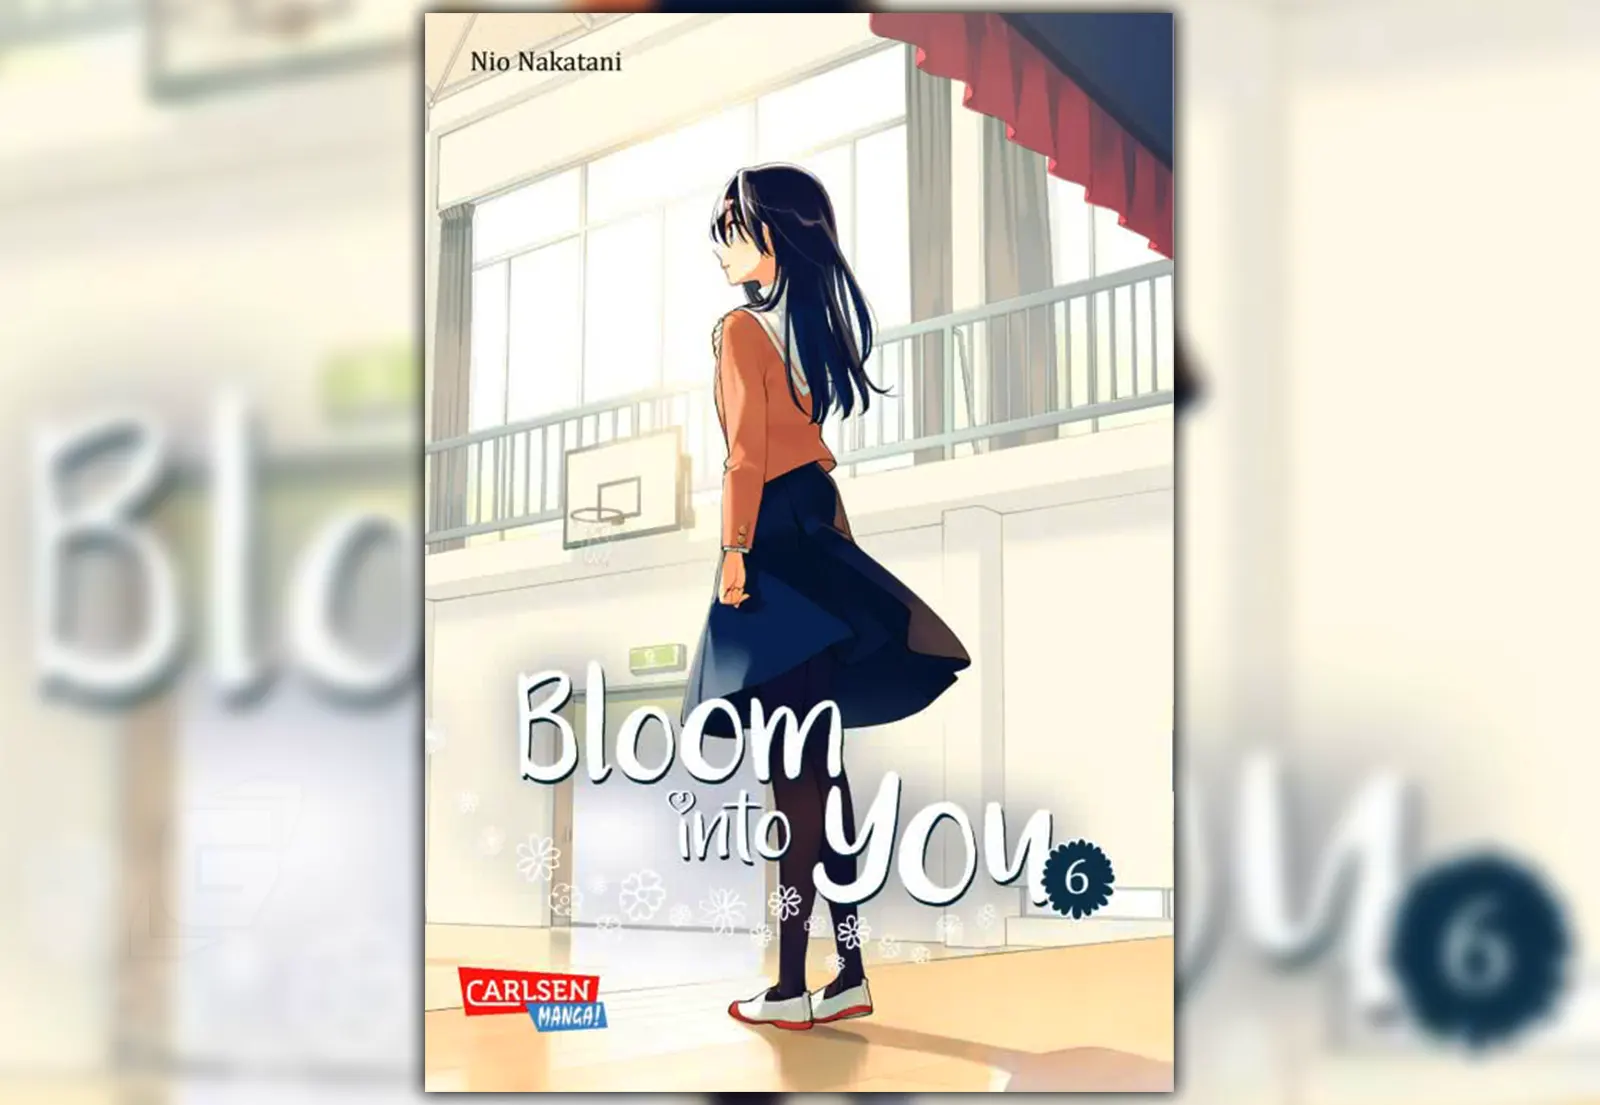 Bloom into you Band 6 - Review